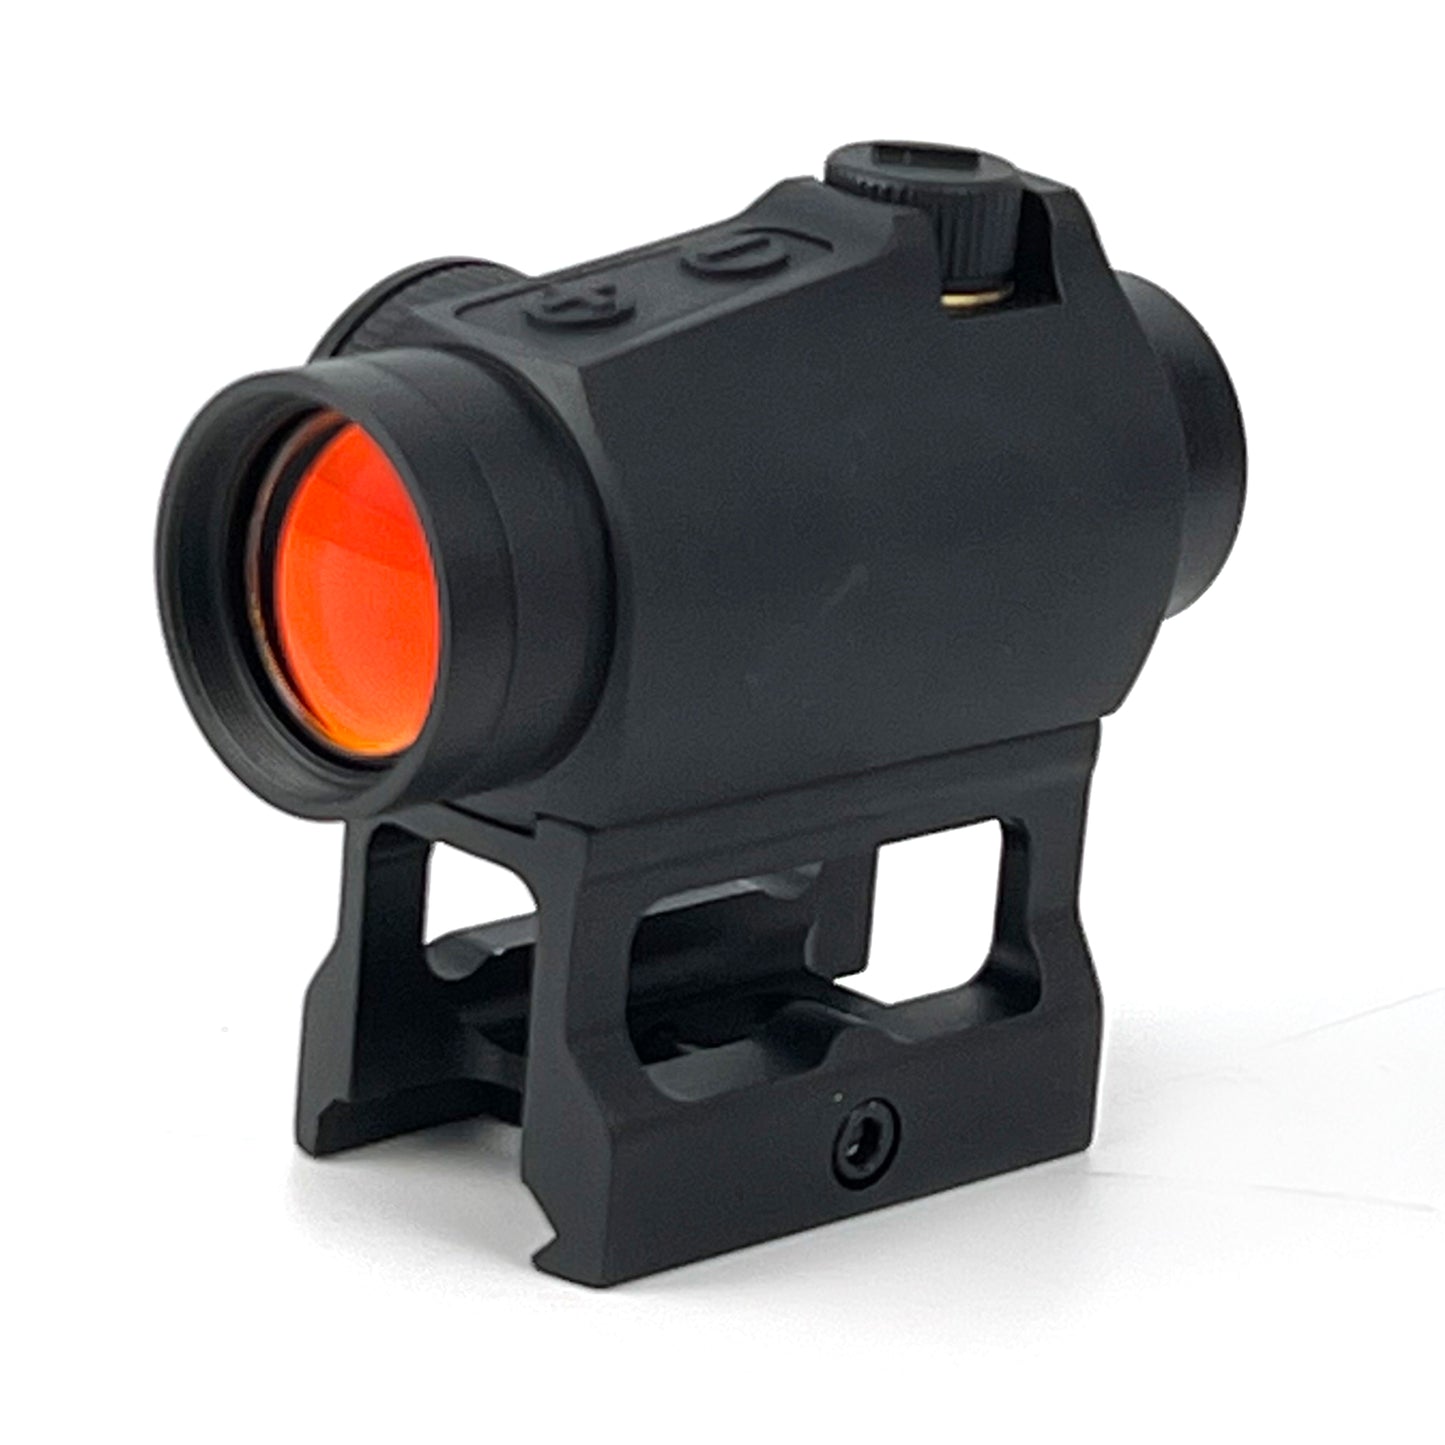 Oxidation Black 3MOA Compact Red Dot Sight For Caliber .223/5.56 And .308/7.62